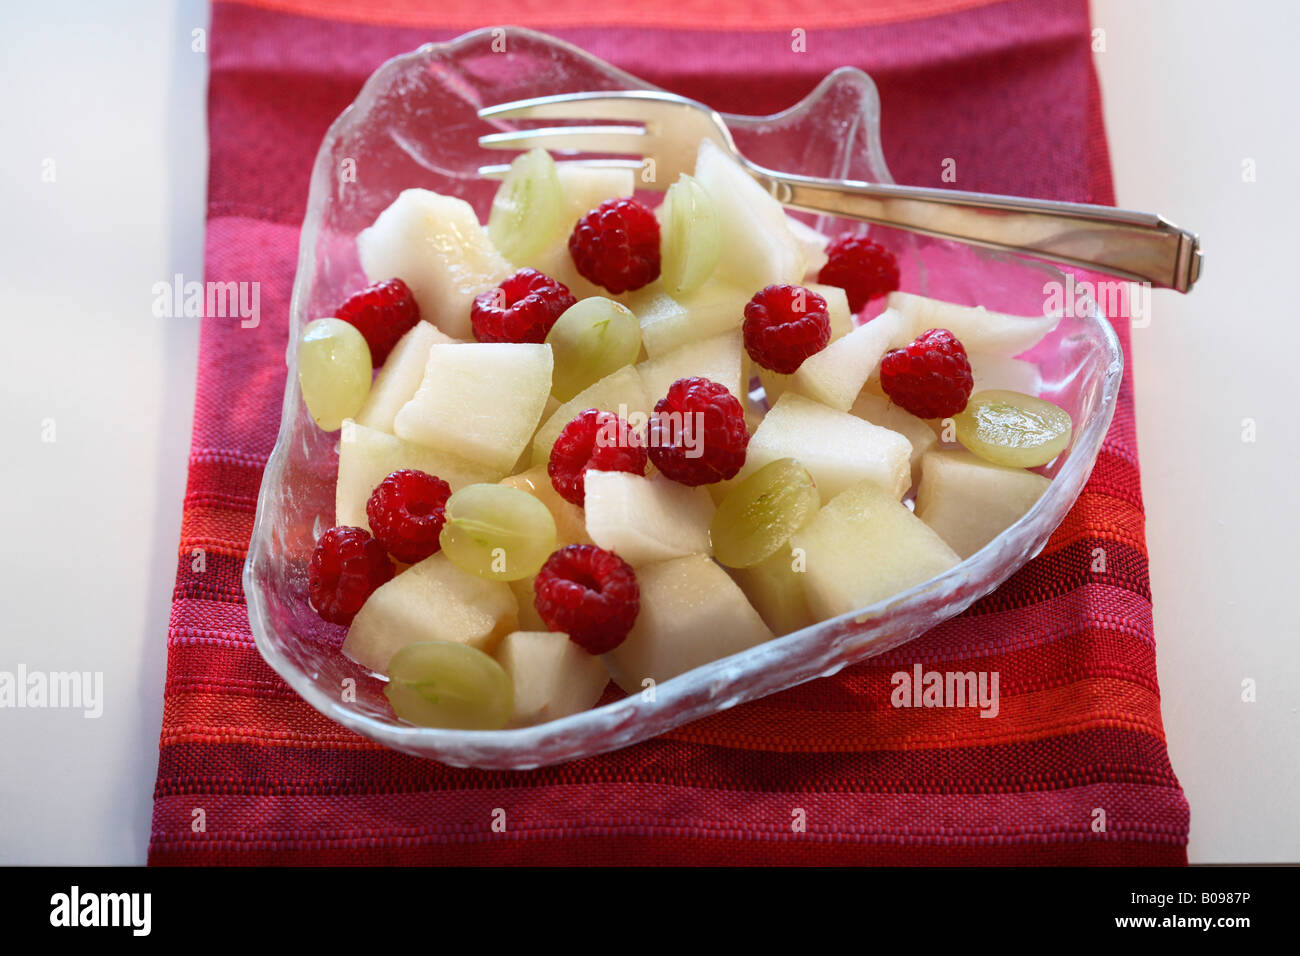 Fruit salad with honeydew melon, grapes and raspberries Stock Photo